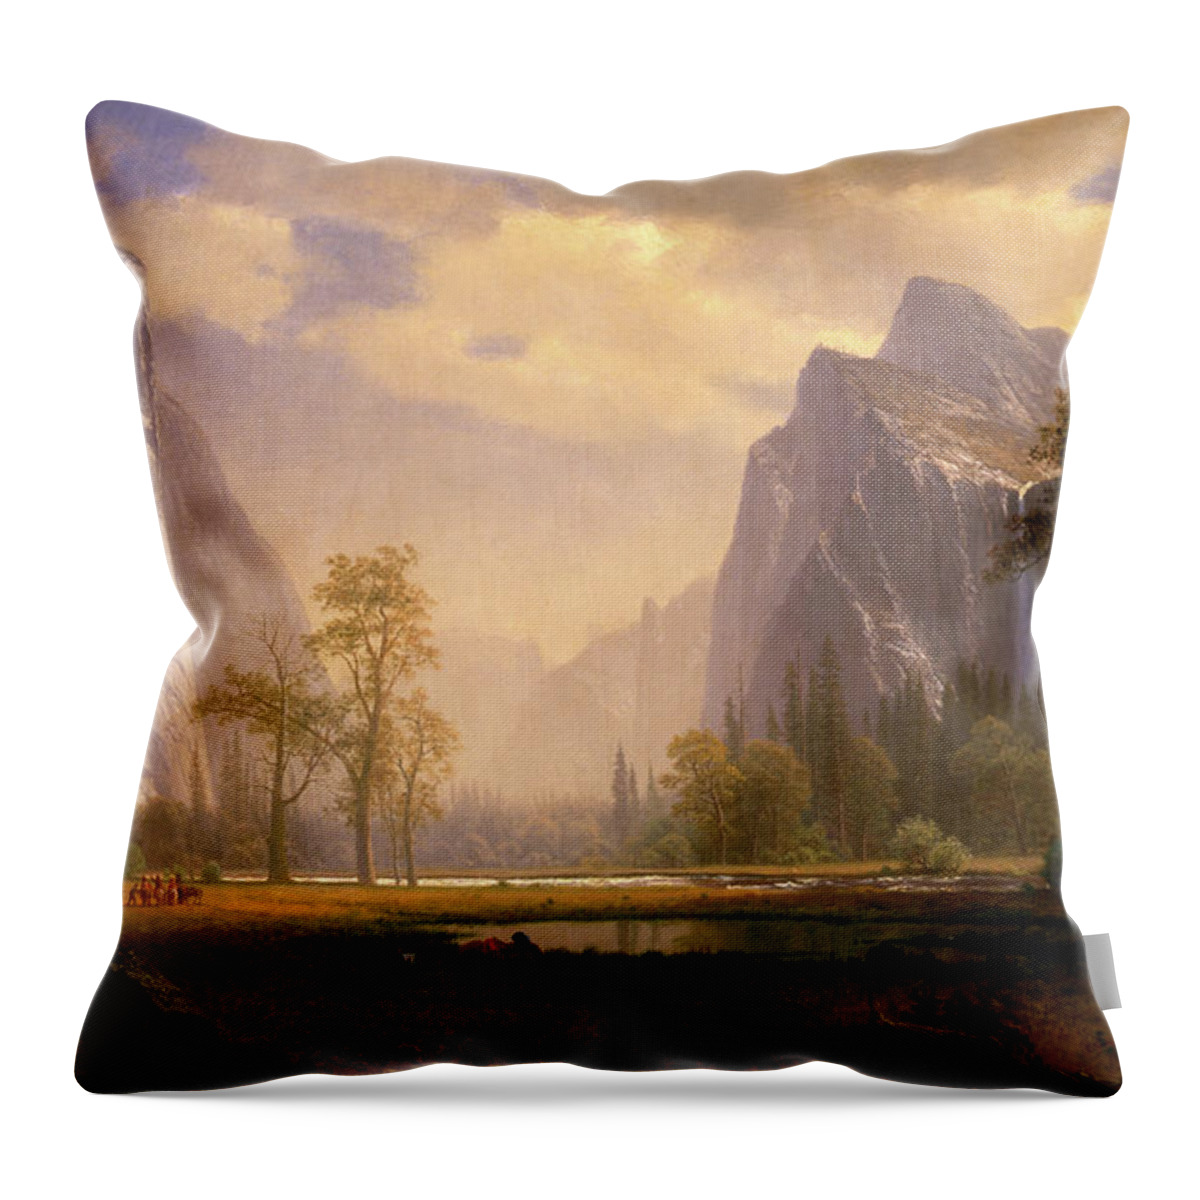 Looking Throw Pillow featuring the painting Looking Up the Yosemite Valley by Albert Bierstadt